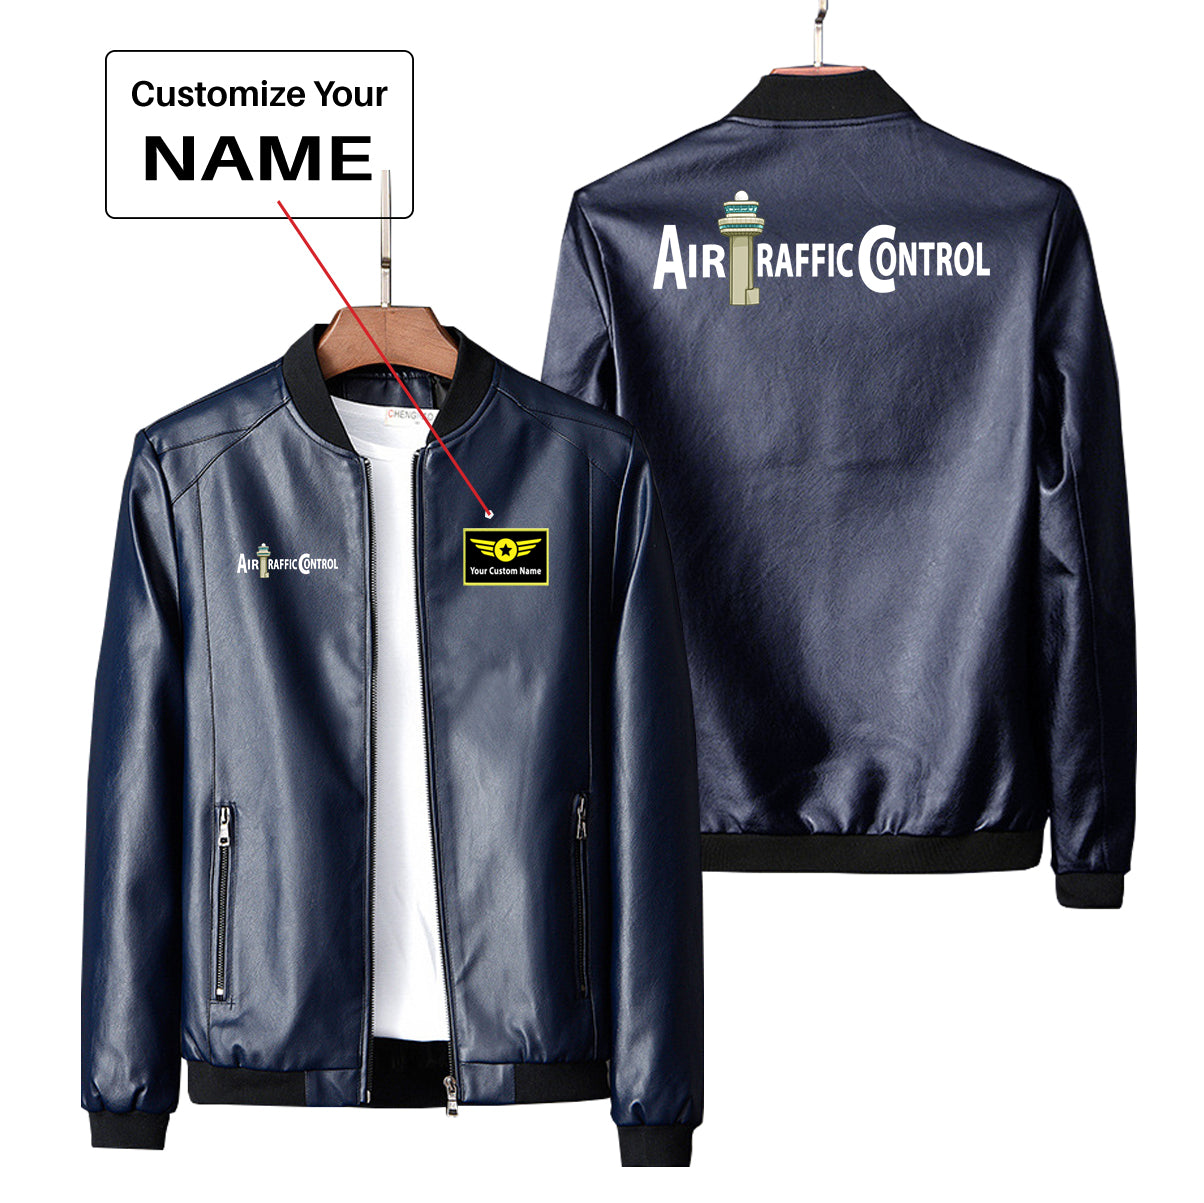 Air Traffic Control Designed PU Leather Jackets